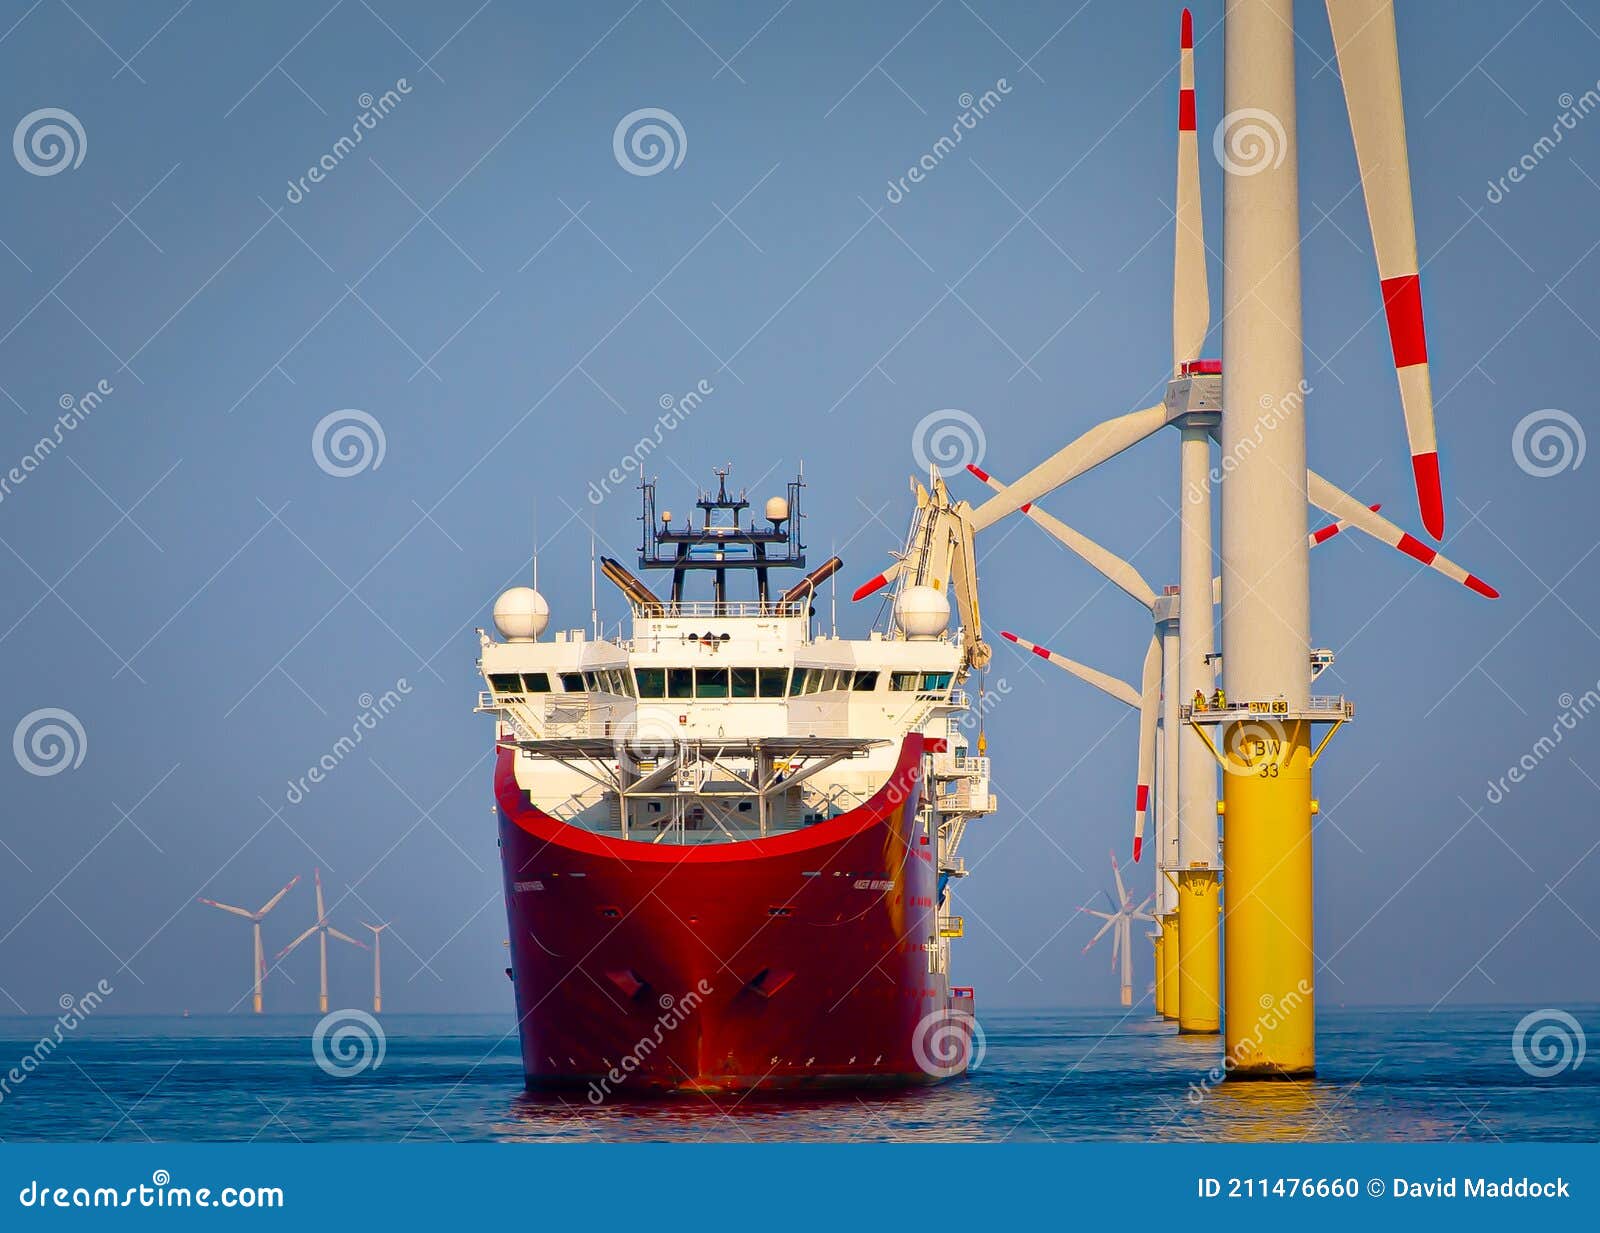 service operational vessel standing by offshore wind turbine